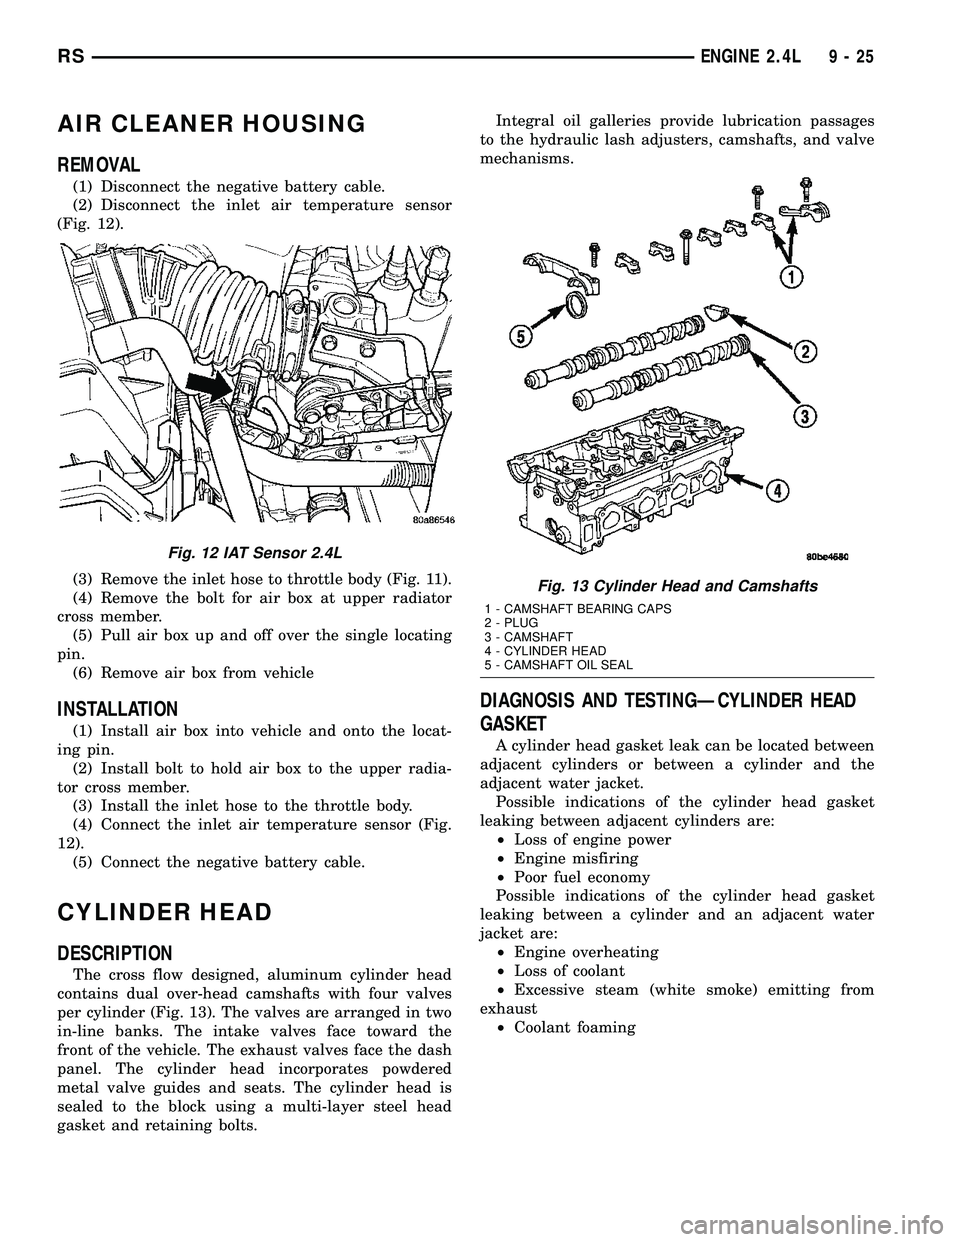 CHRYSLER VOYAGER 2005  Service Manual AIR CLEANER HOUSING
REMOVAL
(1) Disconnect the negative battery cable.
(2) Disconnect the inlet air temperature sensor
(Fig. 12).
(3) Remove the inlet hose to throttle body (Fig. 11).
(4) Remove the b